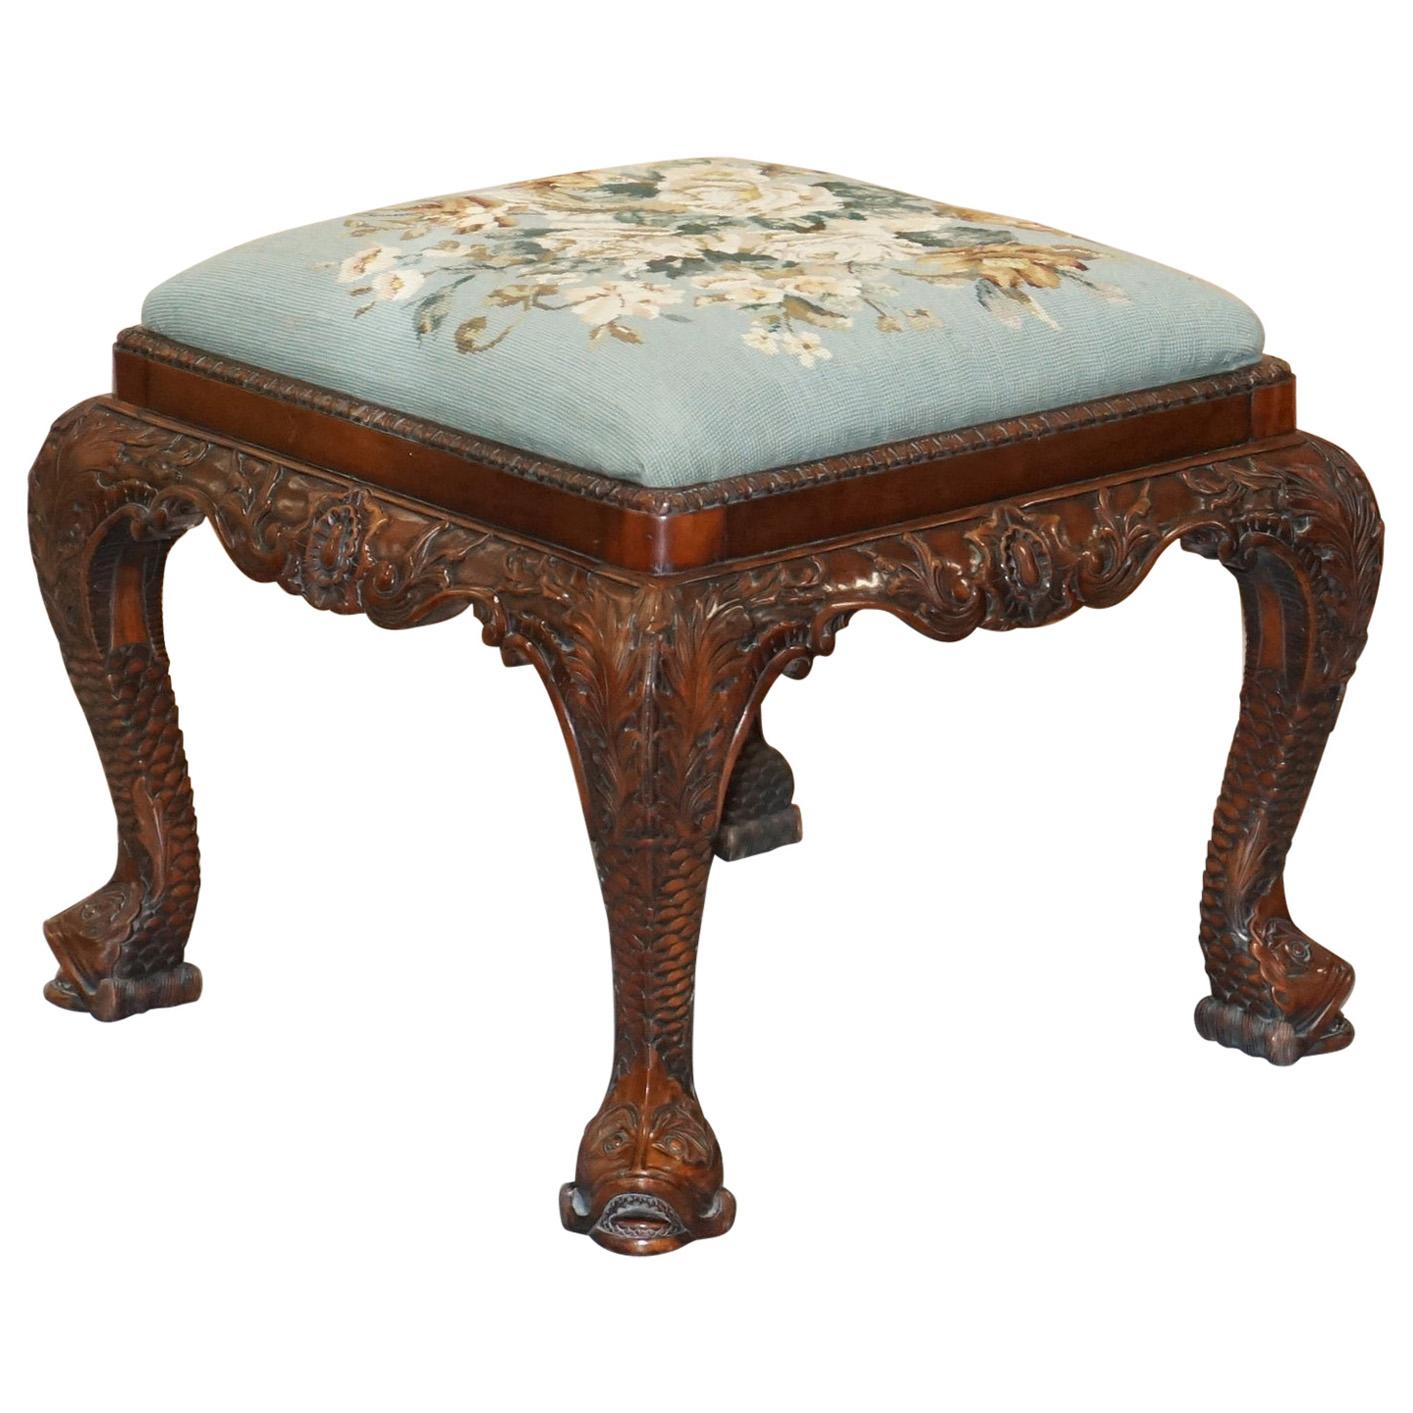 George II Hand Carved Mahogany Floral Embroidered Stool for Dressing Table Piano